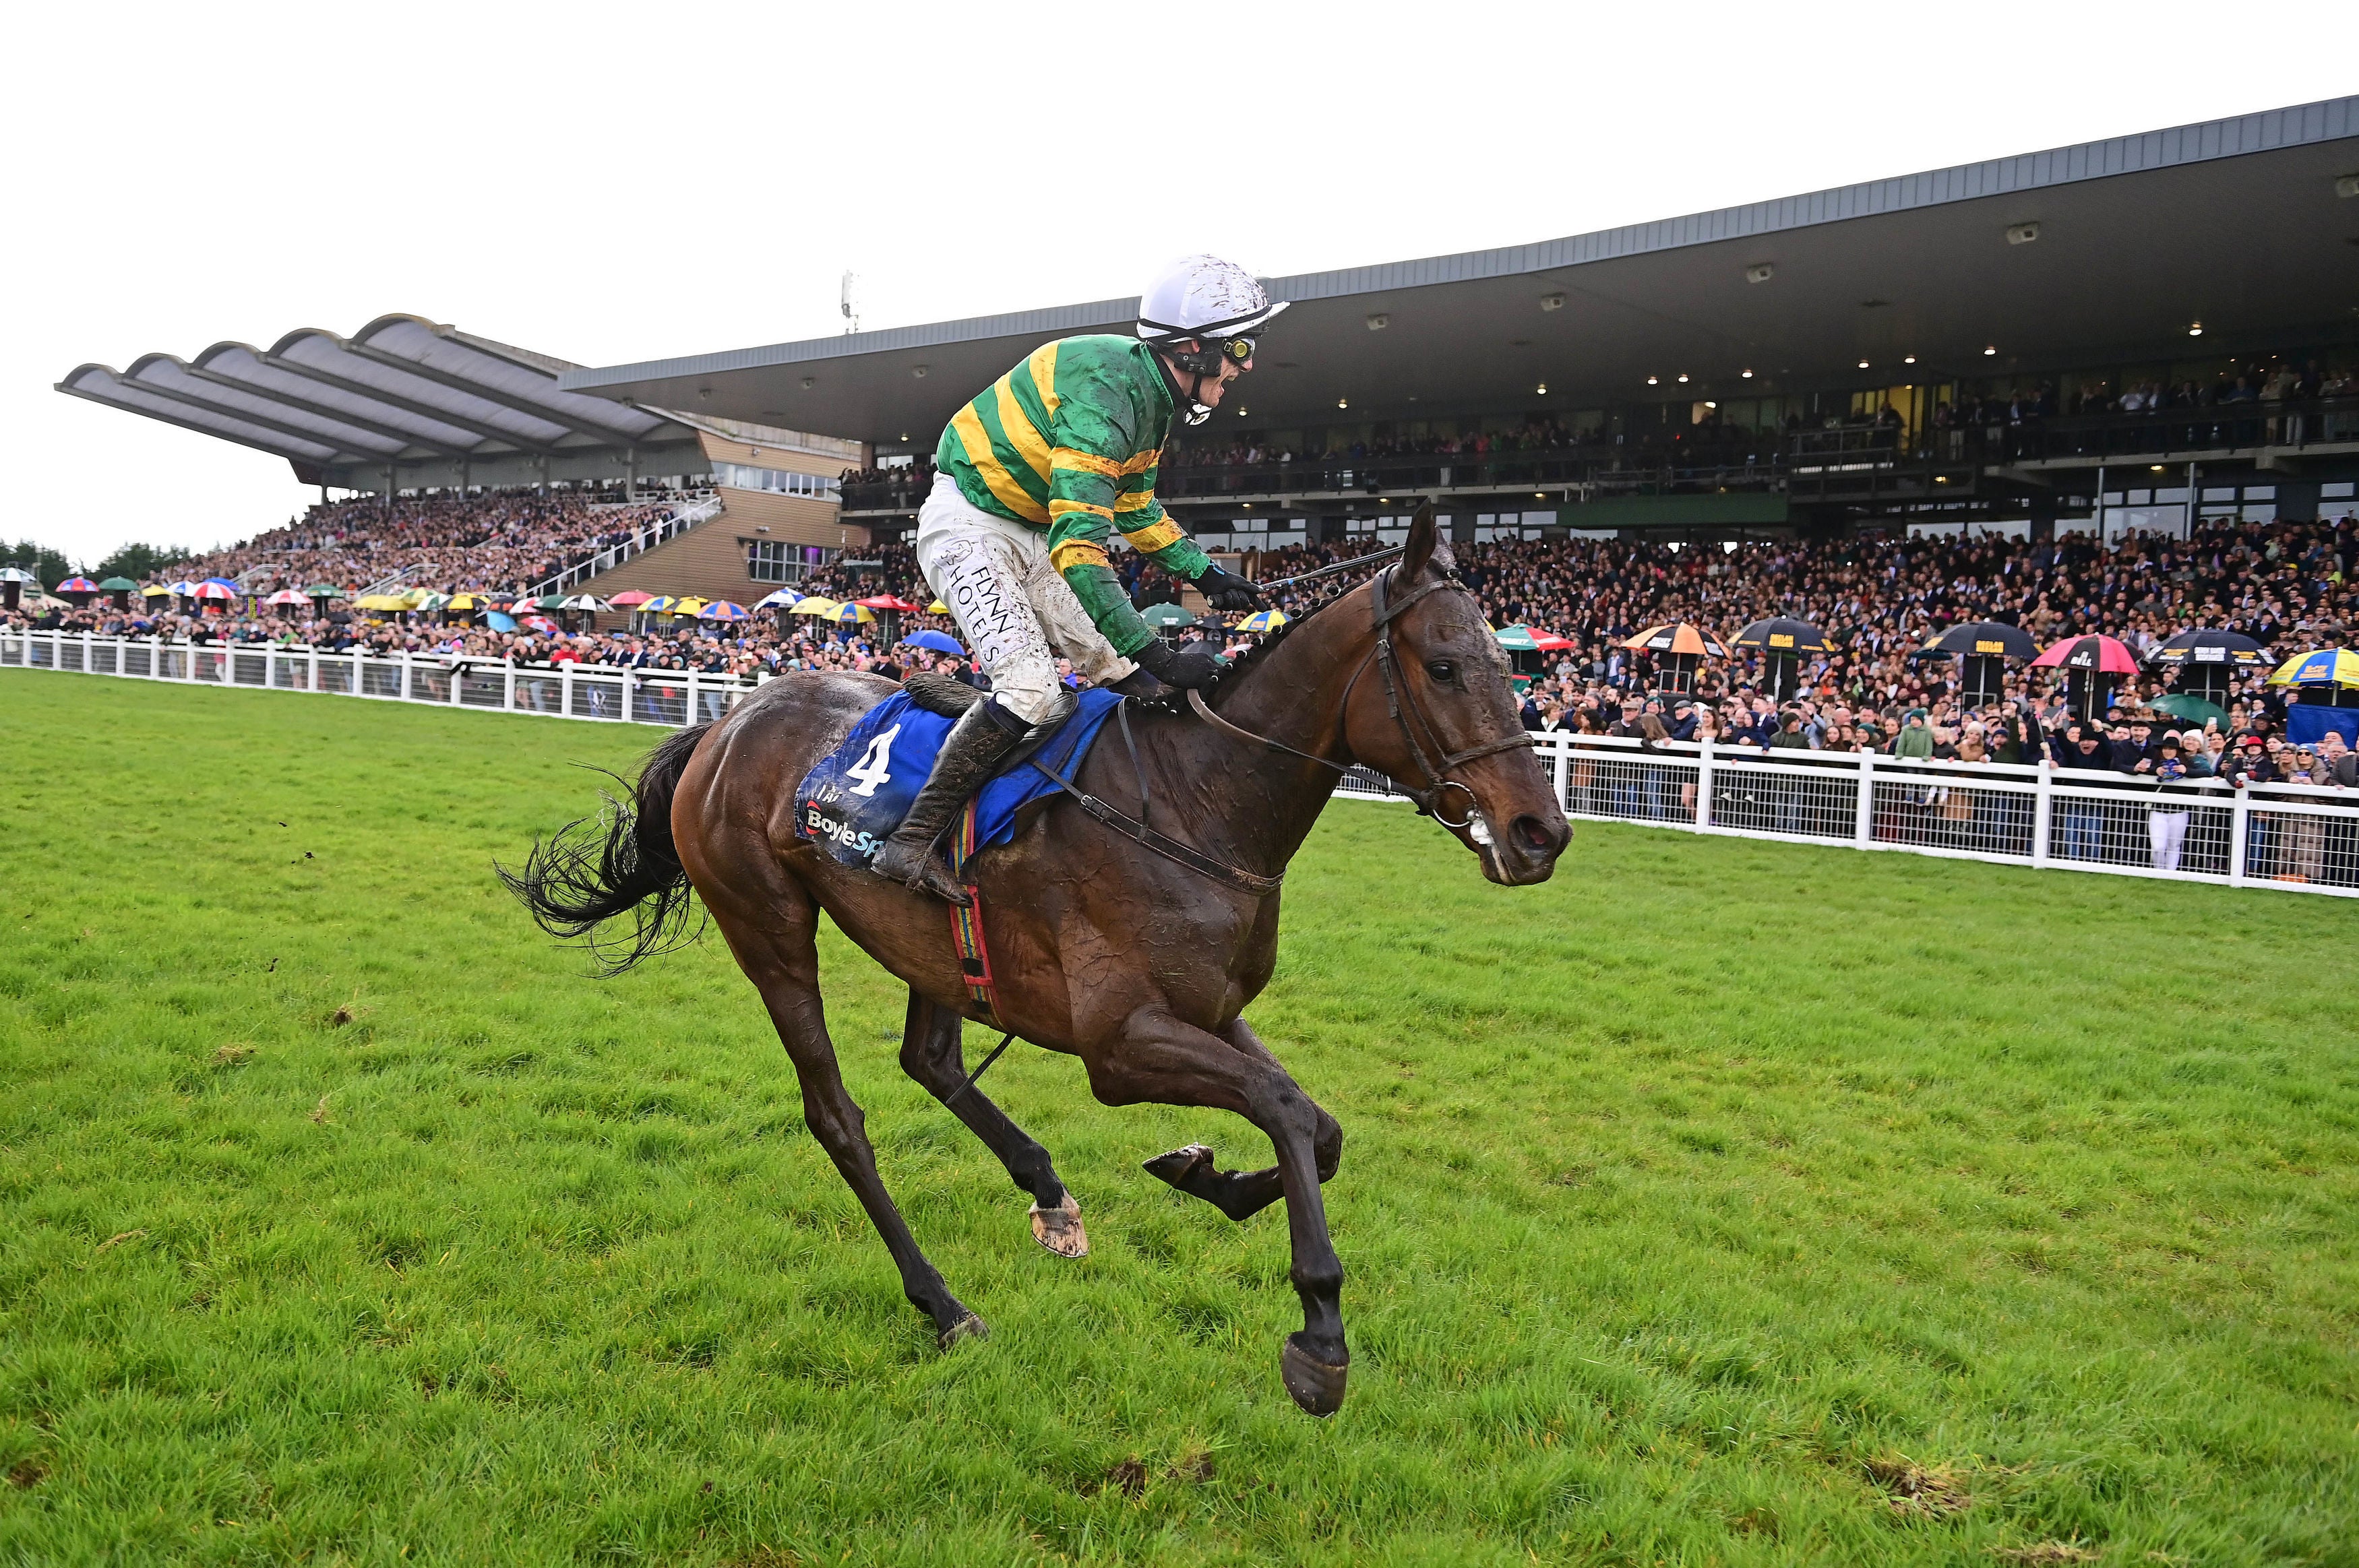 ap mccoy names willie mullins contender as horse he would choose to ride in grand national